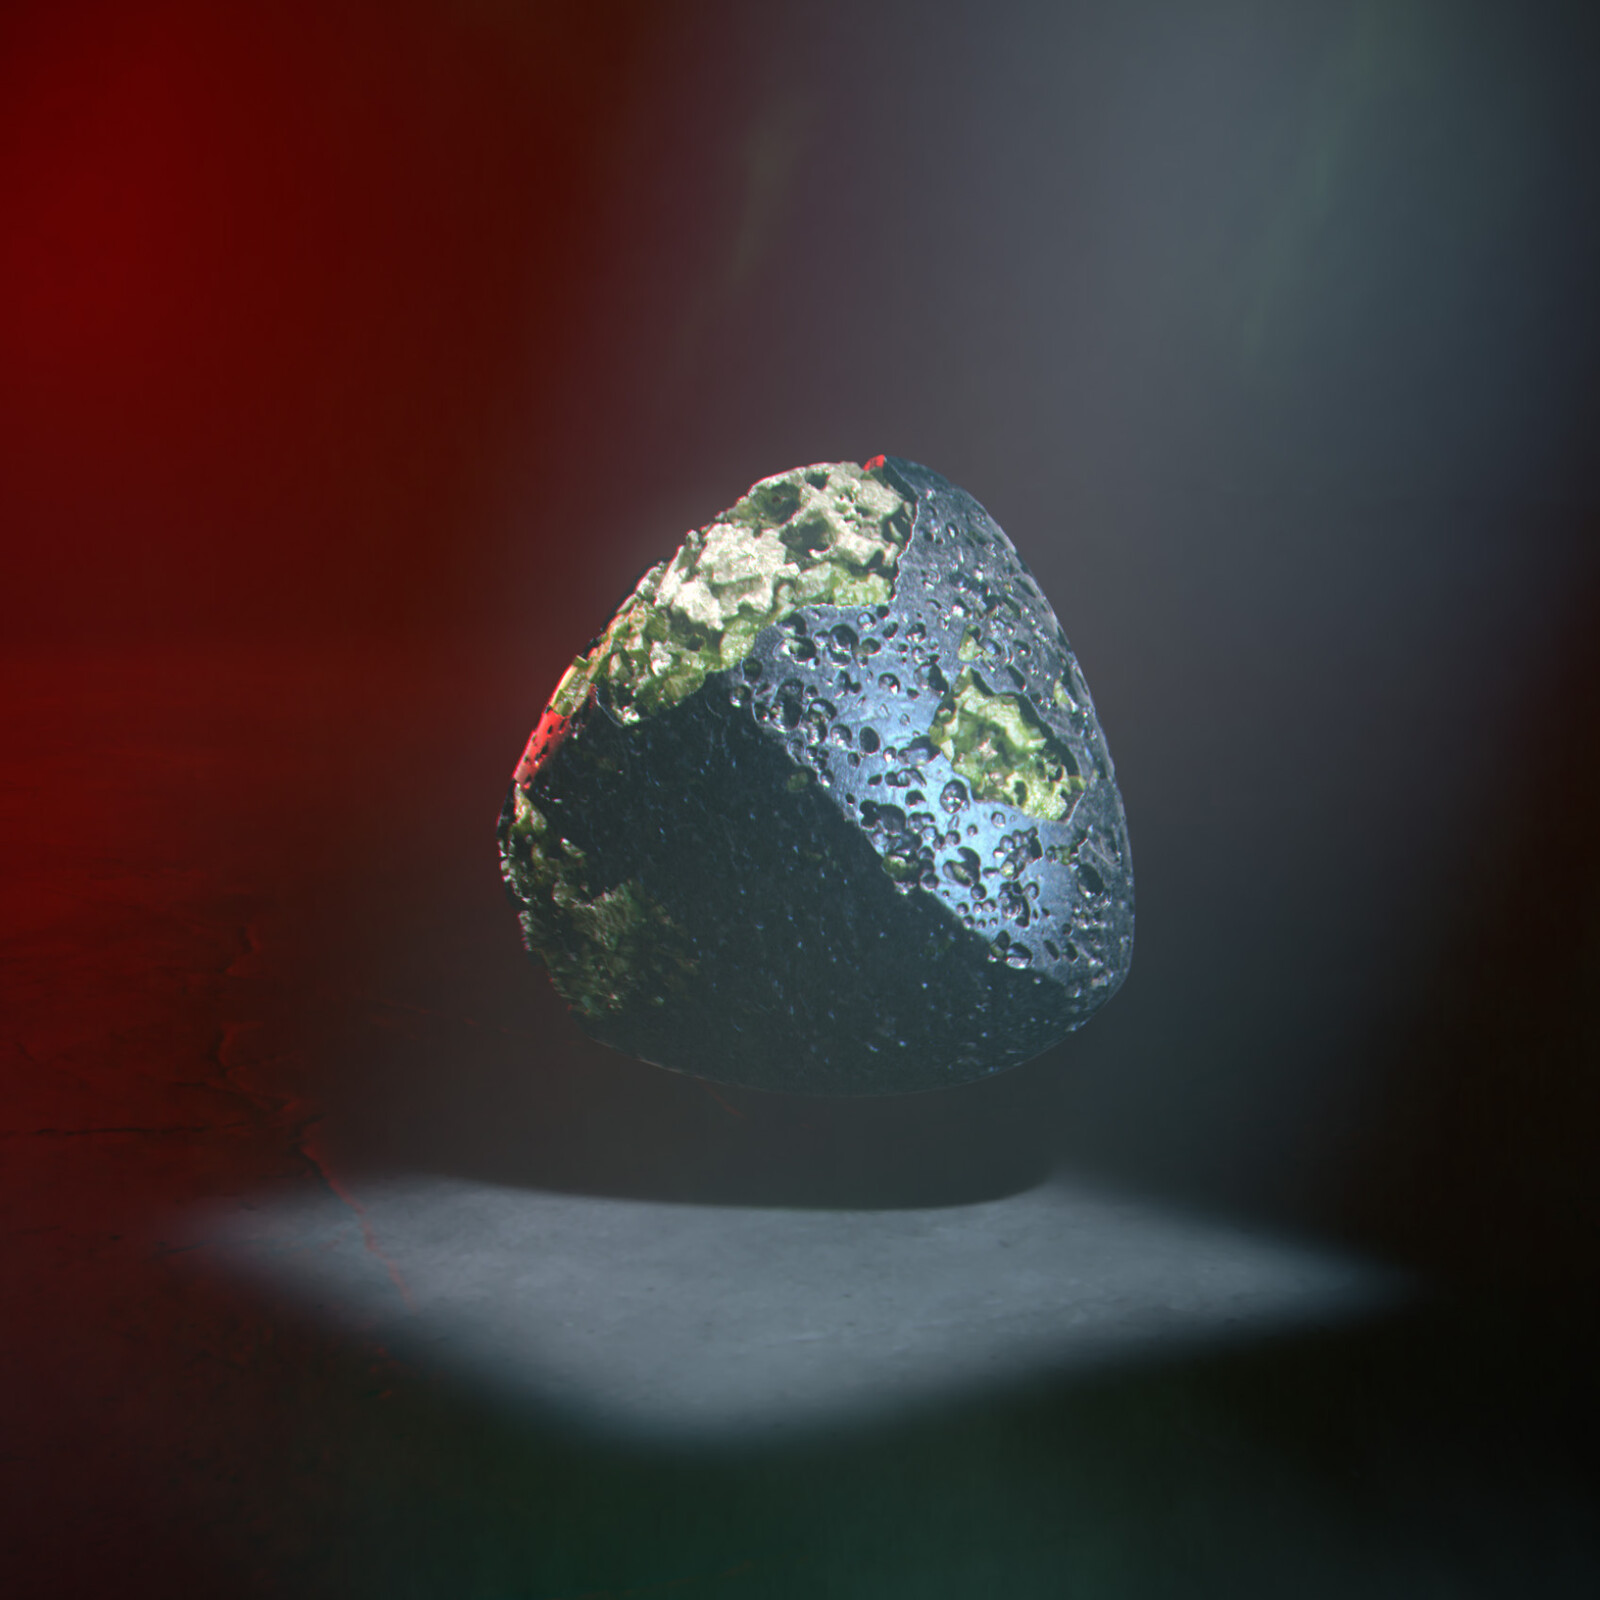 Render / fully procedural  Peridot melted in Lava